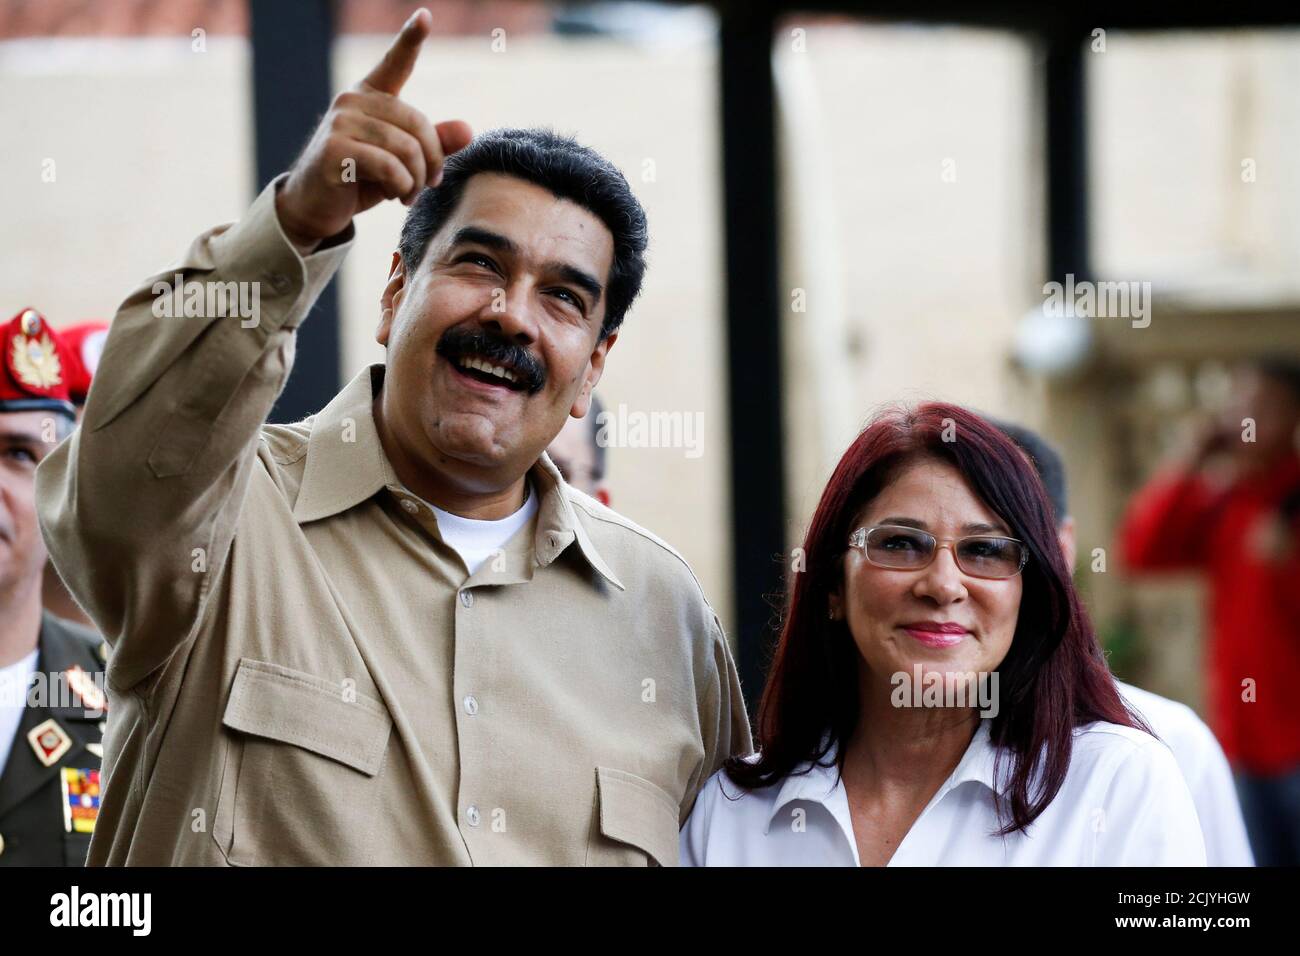 Venezuela's President Nicolas Maduro (L) talks to his wife Cilia Flores  while they wait the arrival of Colombia's President Juan Manuel Santos at  Macagua Hydroelectric compound in Puerto Ordaz, Venezuela August 11,